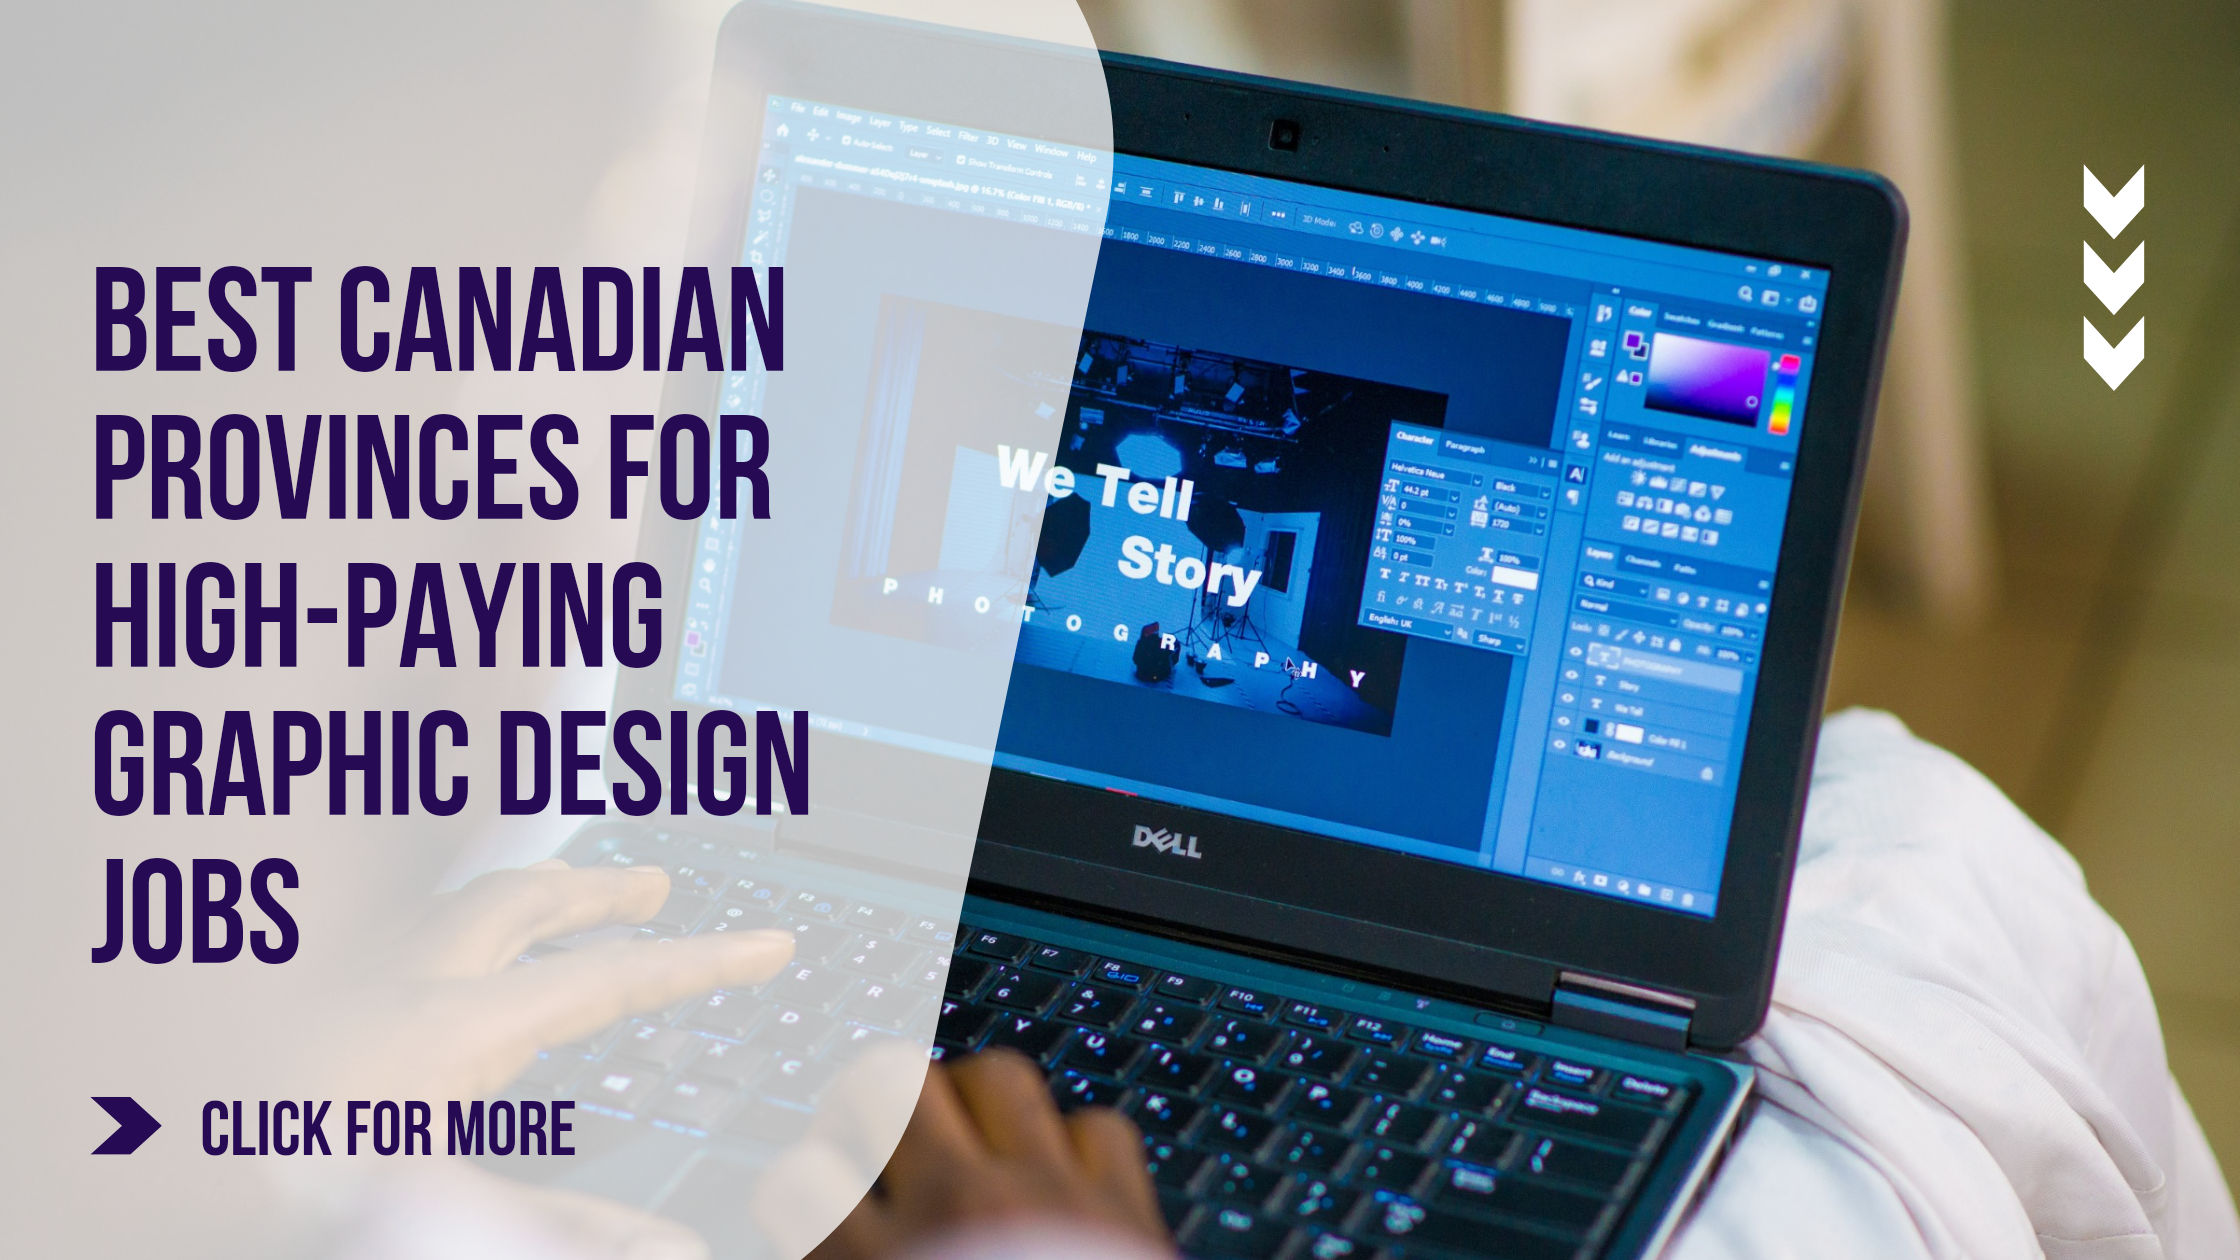 The Best Canadian Provinces for High-Paying Graphic Design Jobs